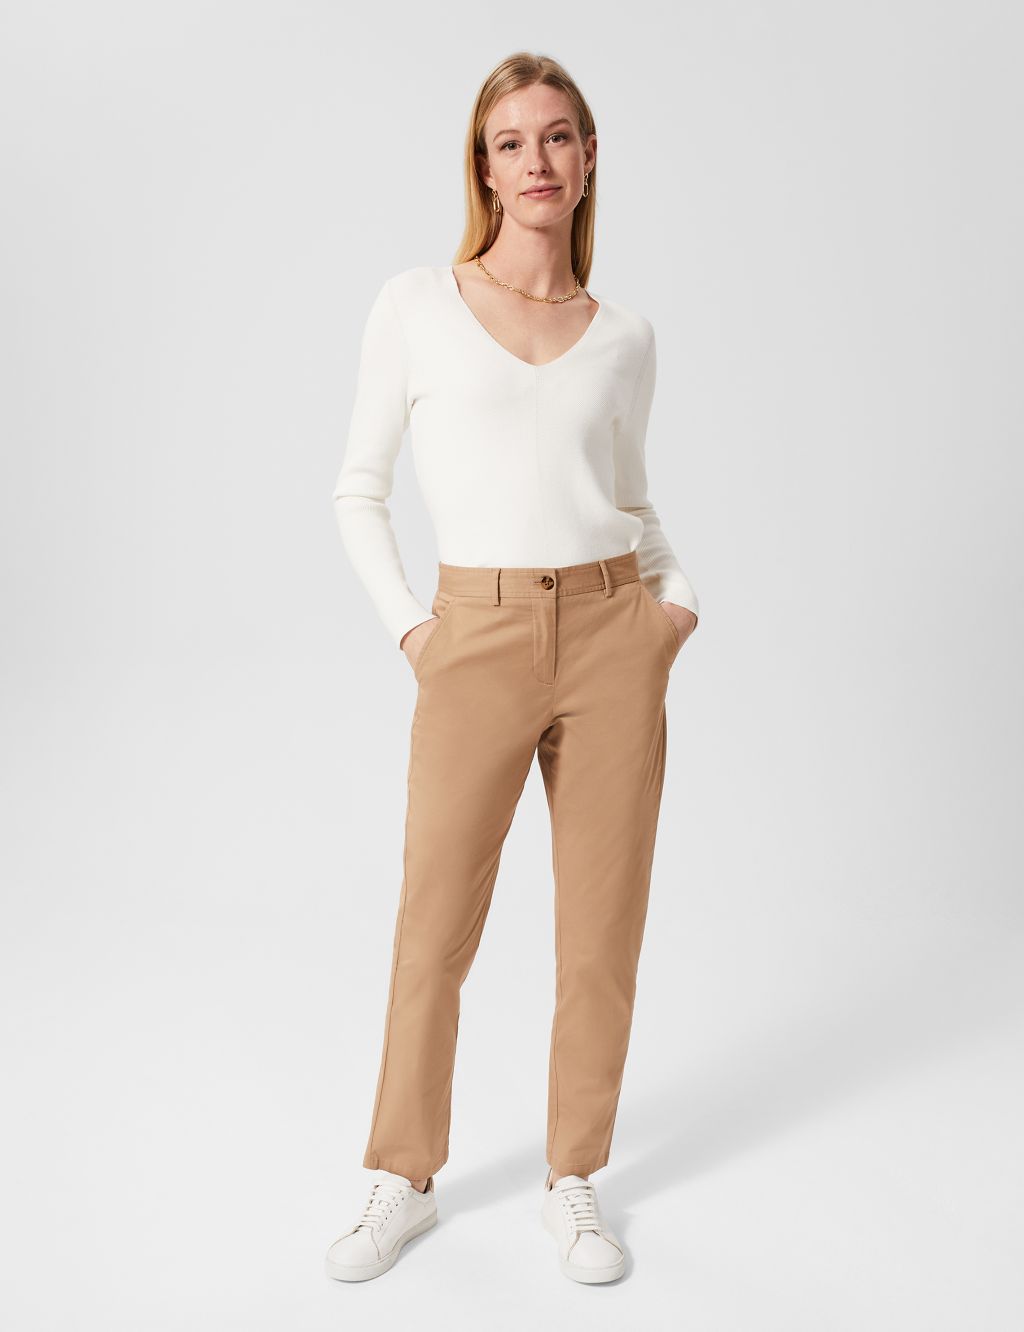 Cotton Rich Chinos image 1